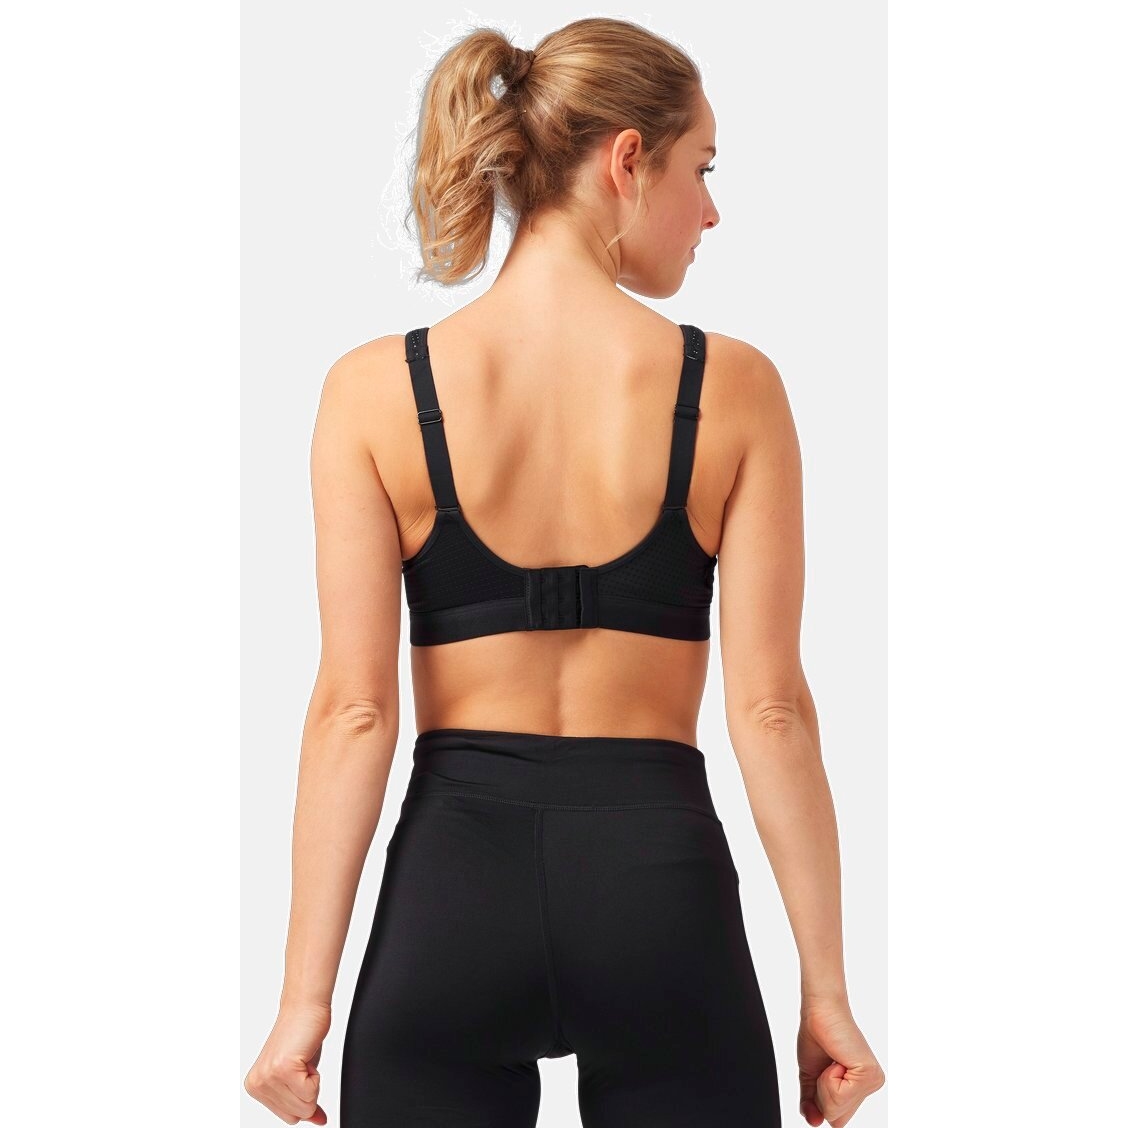 Buy Alies Every Day Sassy Backless Style Single Hook Bra for Low